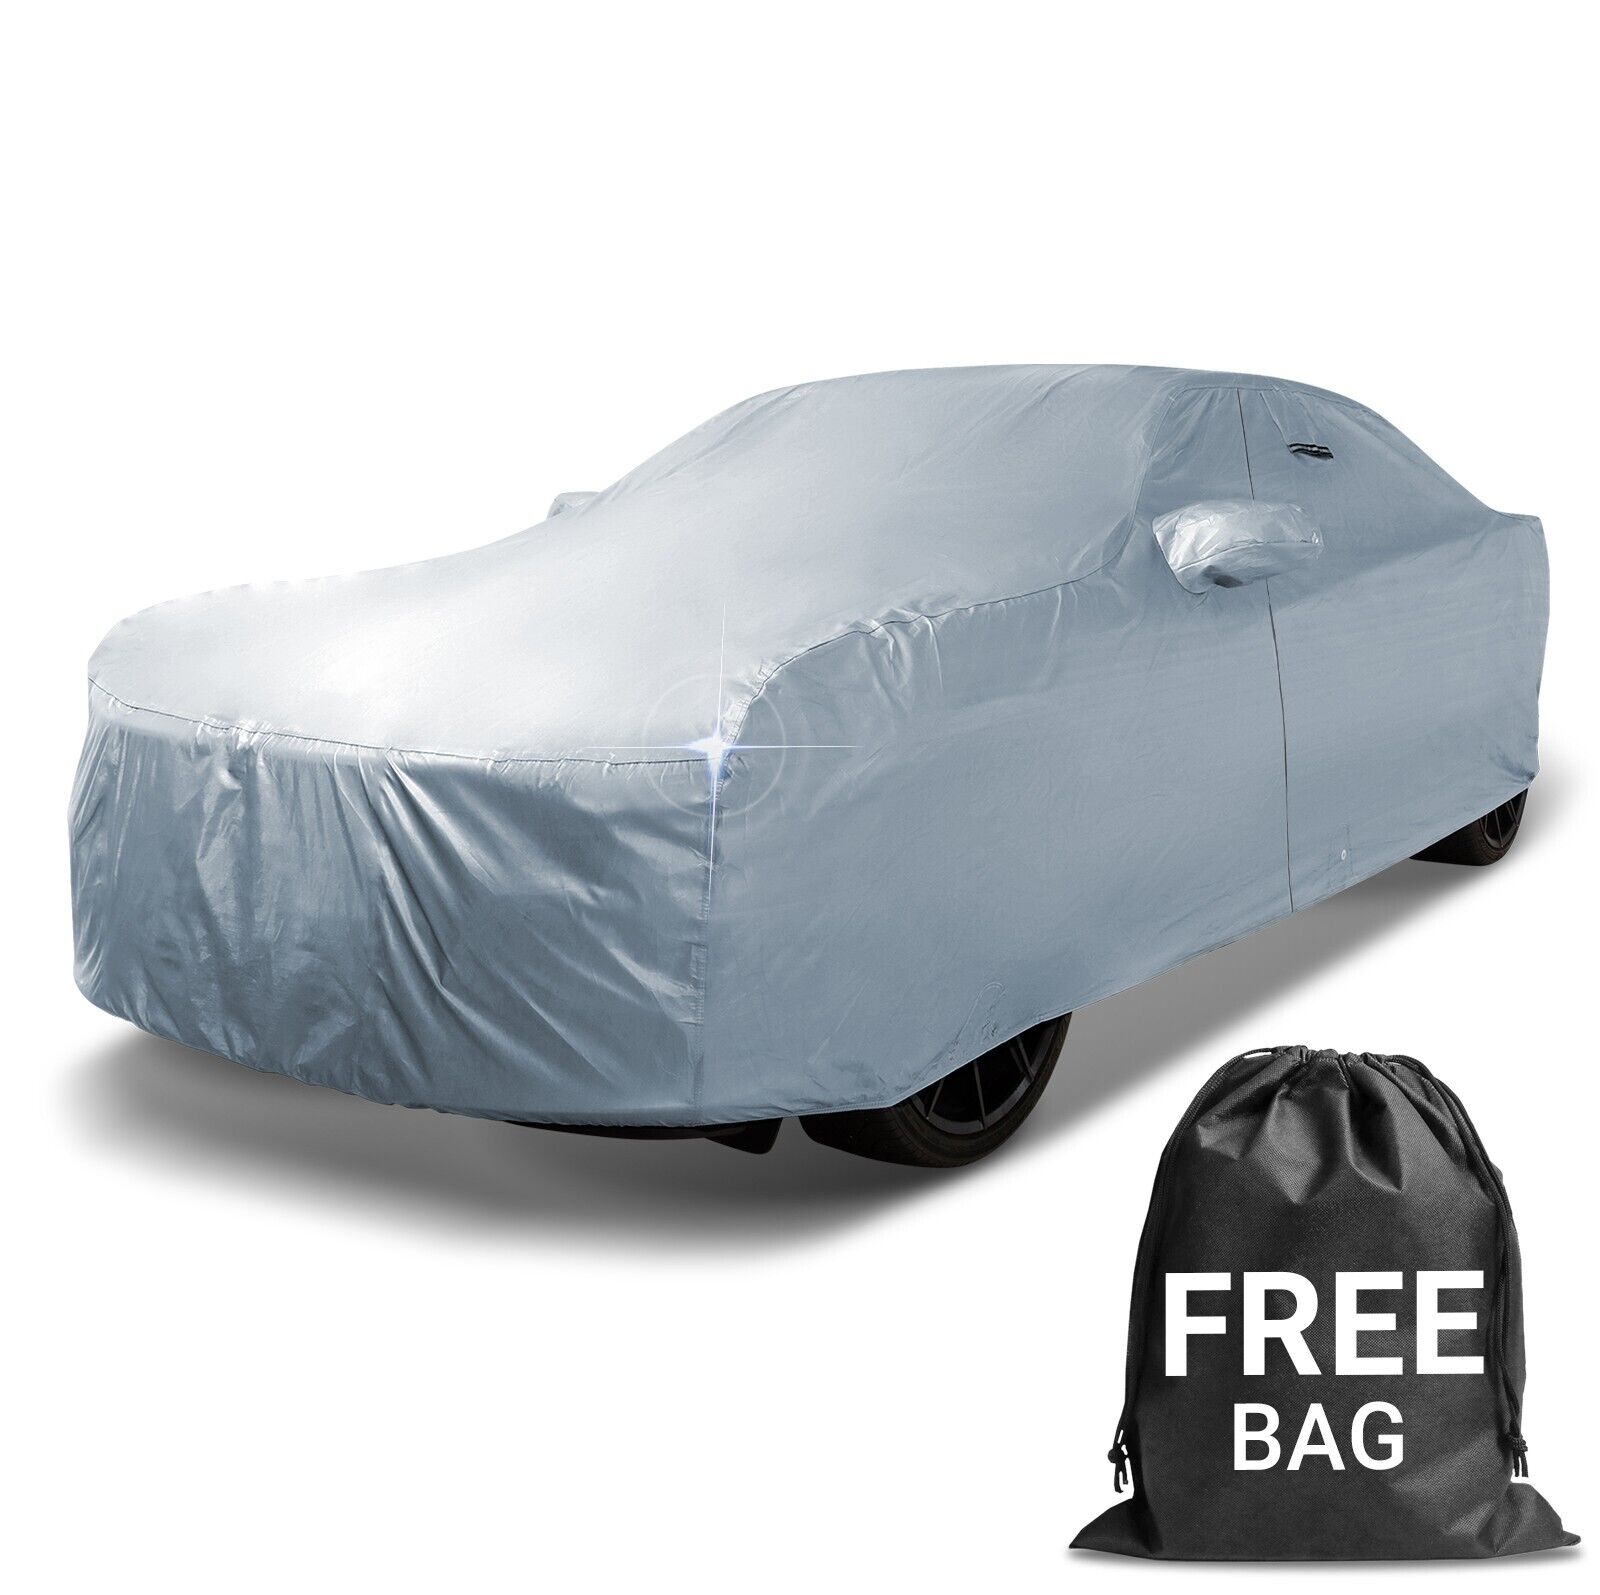 Fits [LINCOLN MARK VII] 1984 1985 1986 1987 1988 1989 1990 1991 1992 CAR COVER